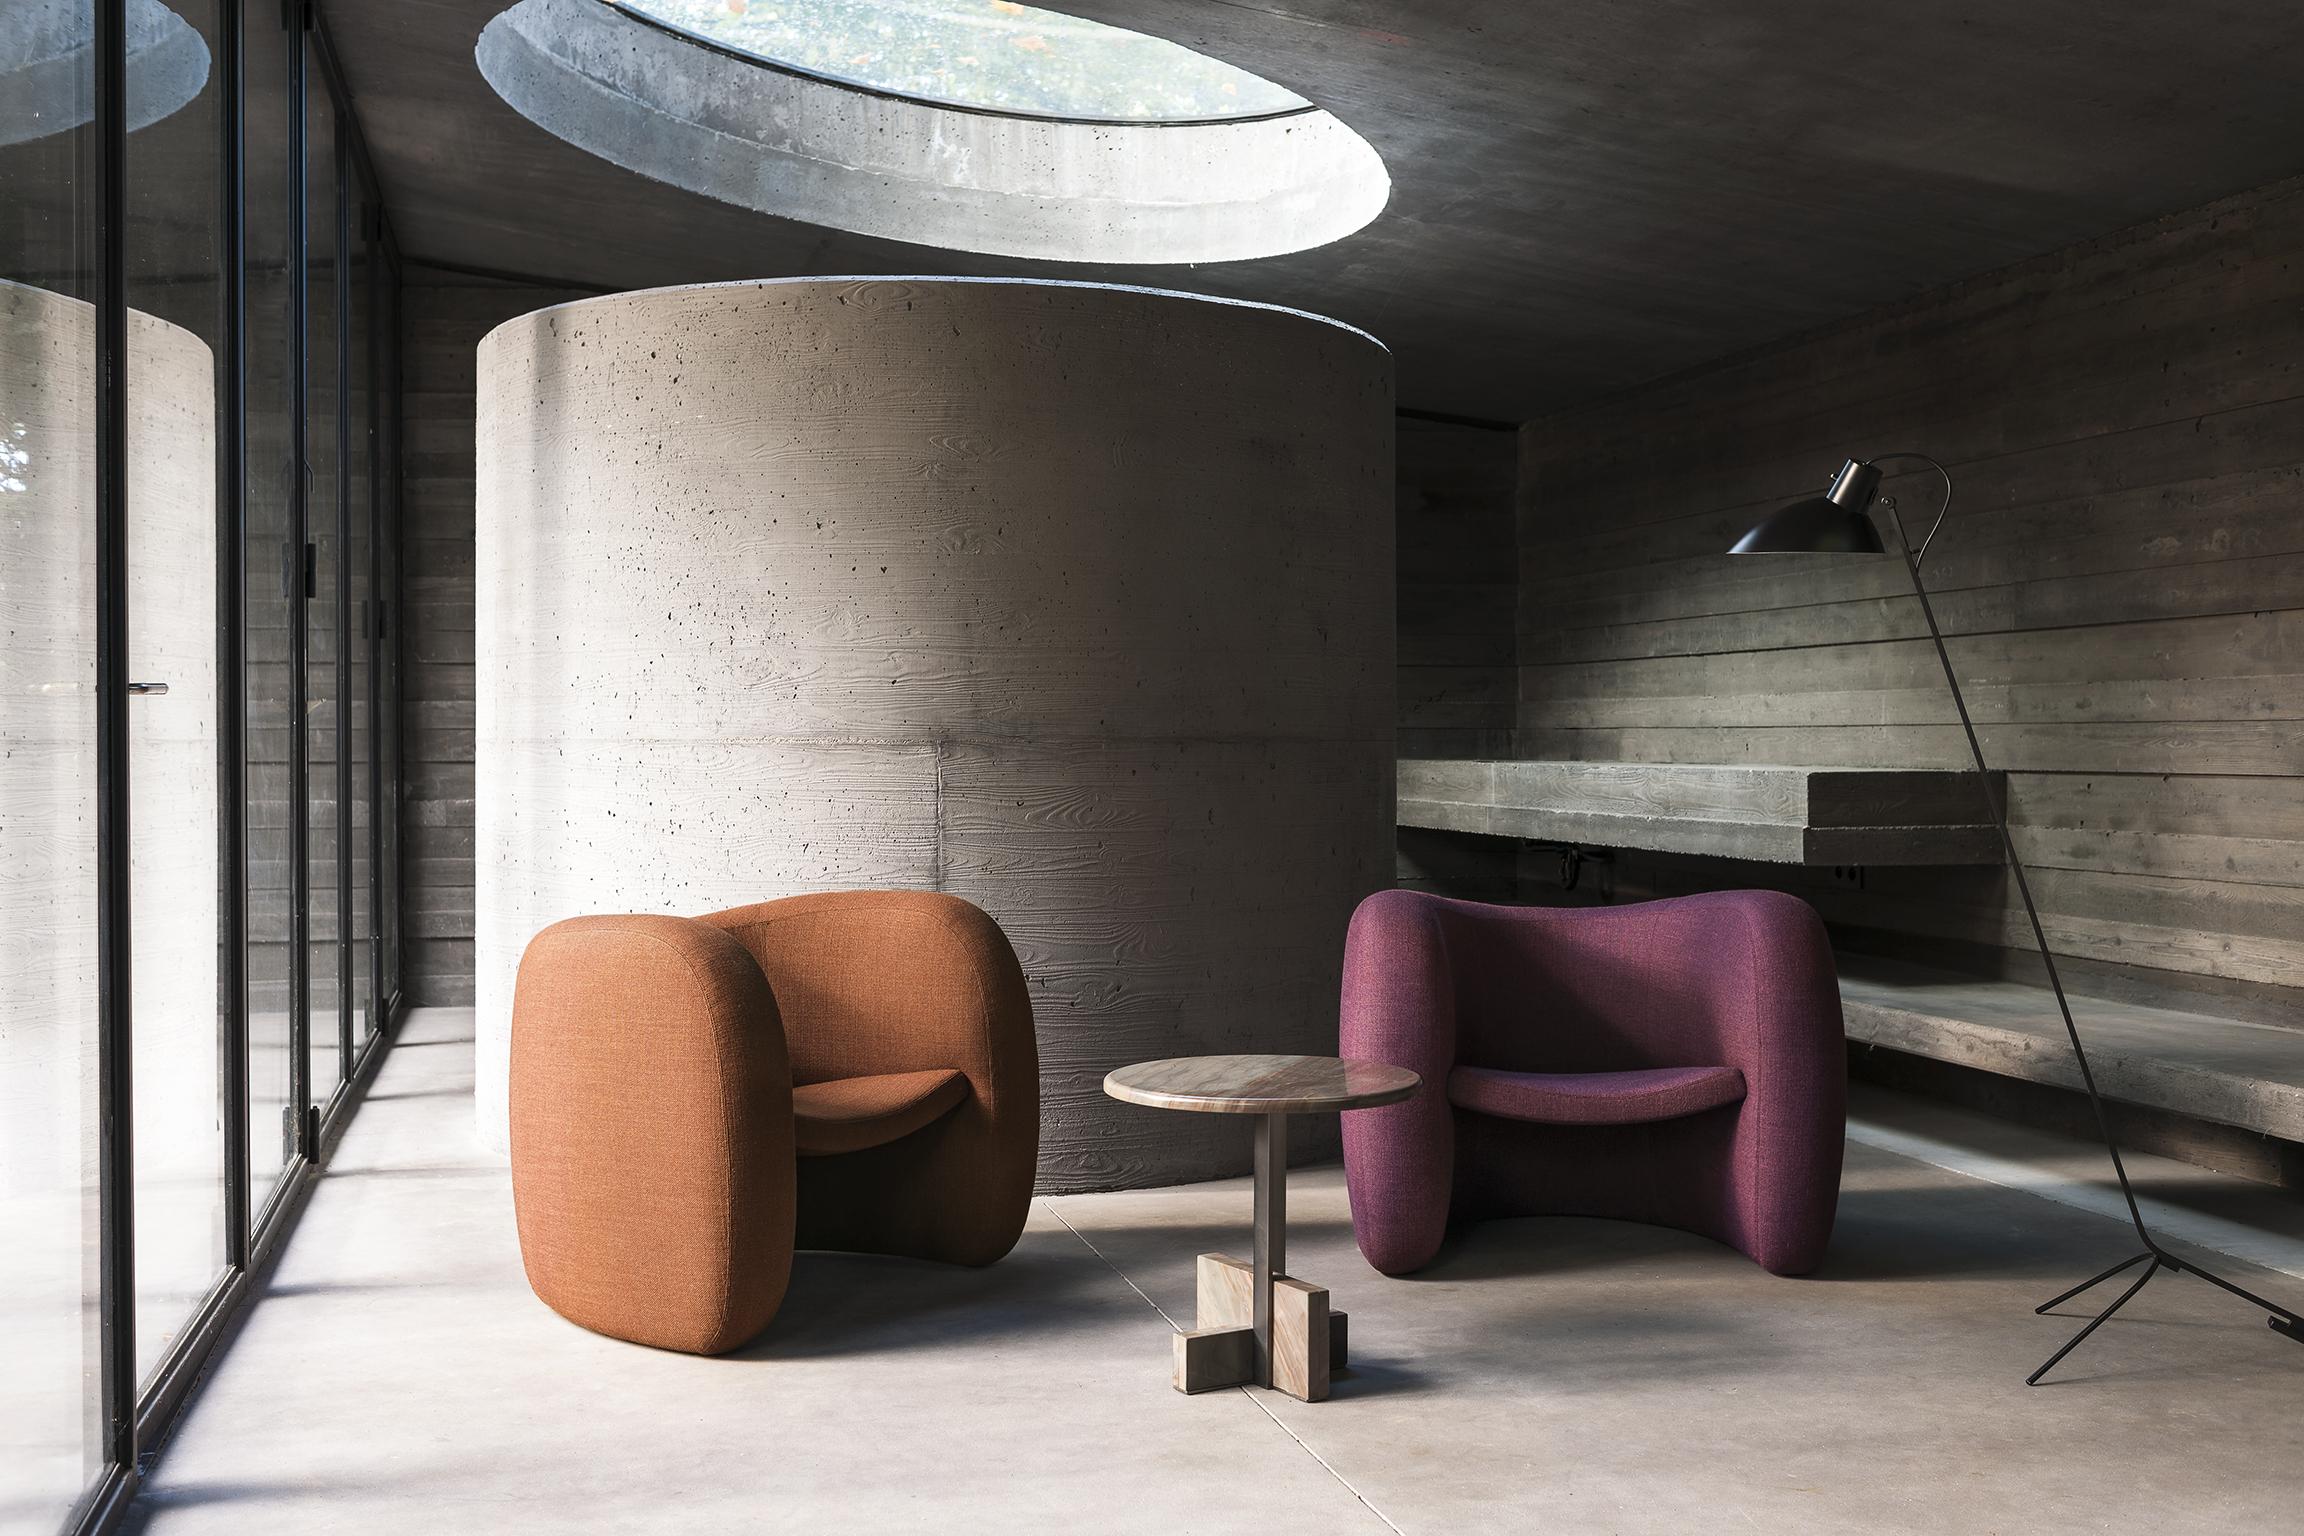 Zanini de Zanine, the famous Brazilian designer, son of architect and designer José Zanine Caldas, creates an absolutely original model, conceived exclusively for Tacchini: Lagoa. Its soft, rounded forms surround a suspended seat that gives a marked